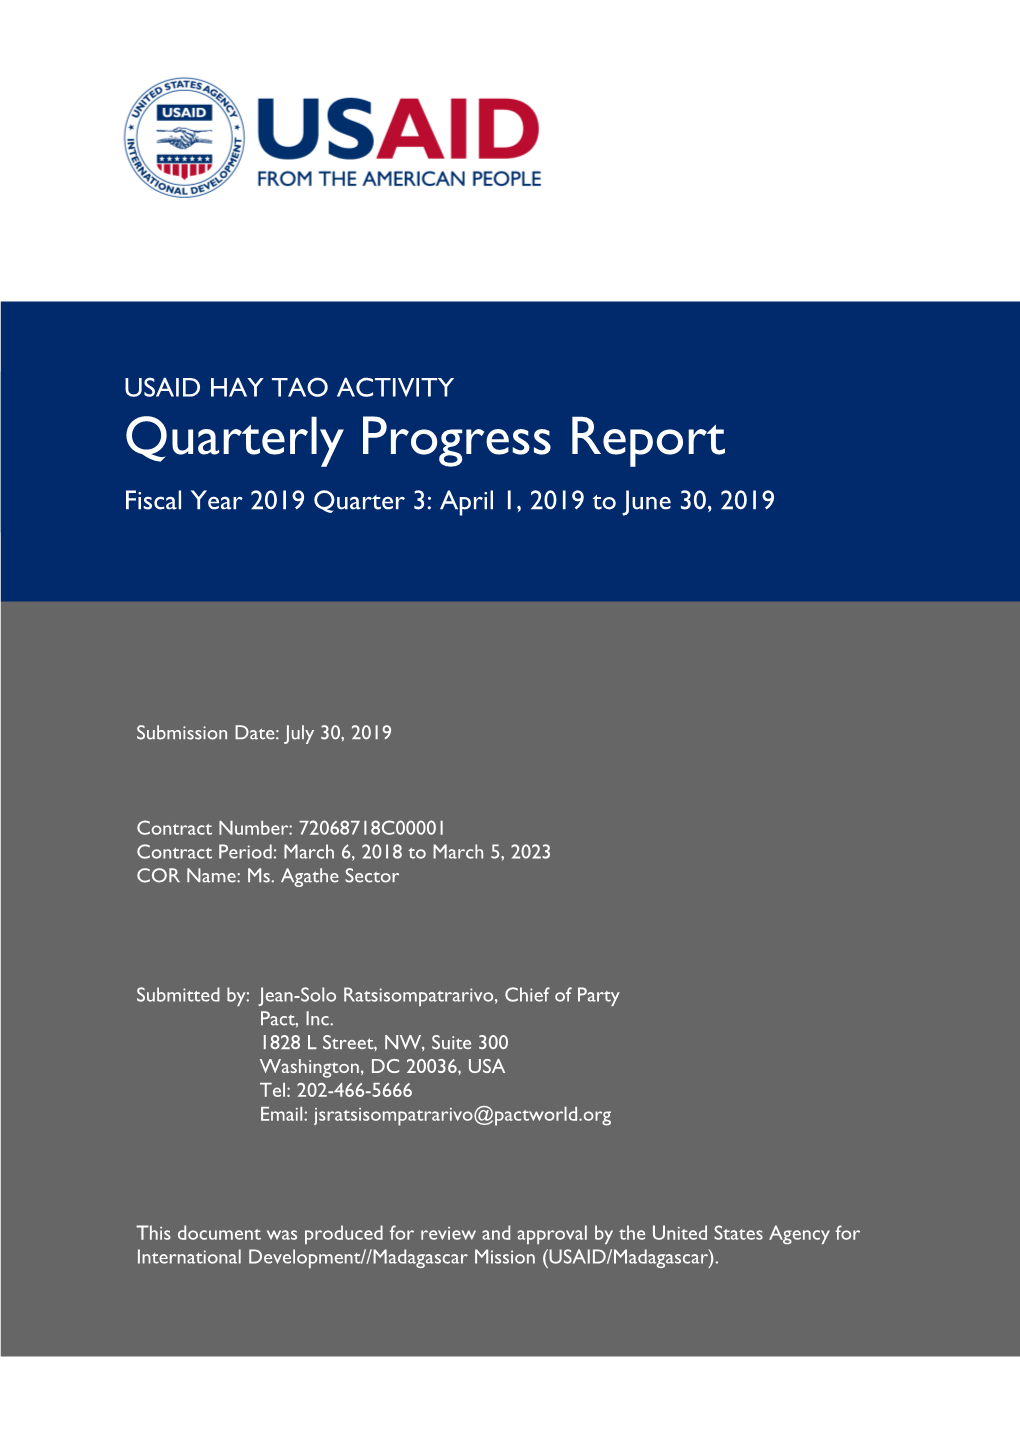 USAID HAY TAO ACTIVITY Quarterly Progress Report Fiscal Year 2019 Quarter 3: April 1, 2019 to June 30, 2019